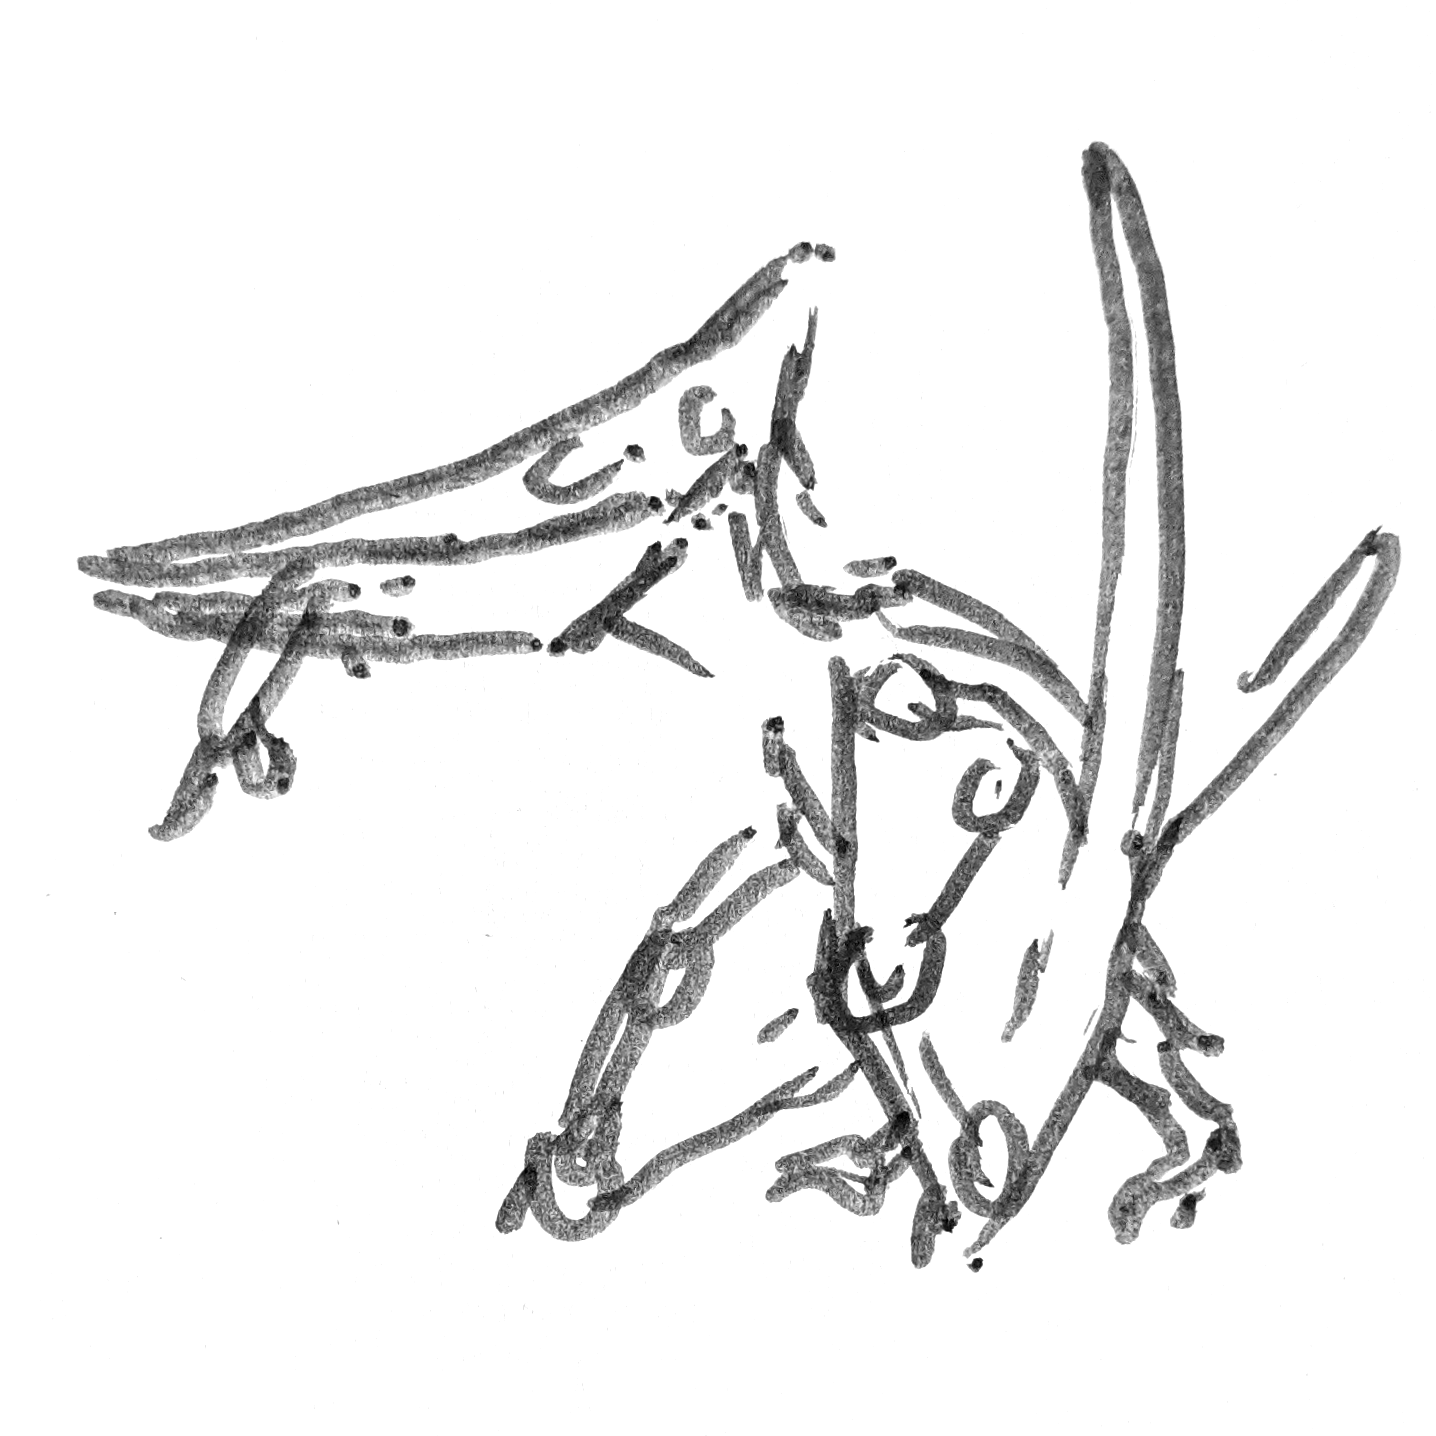 Pteranodon drawing holding a fish in their mouth